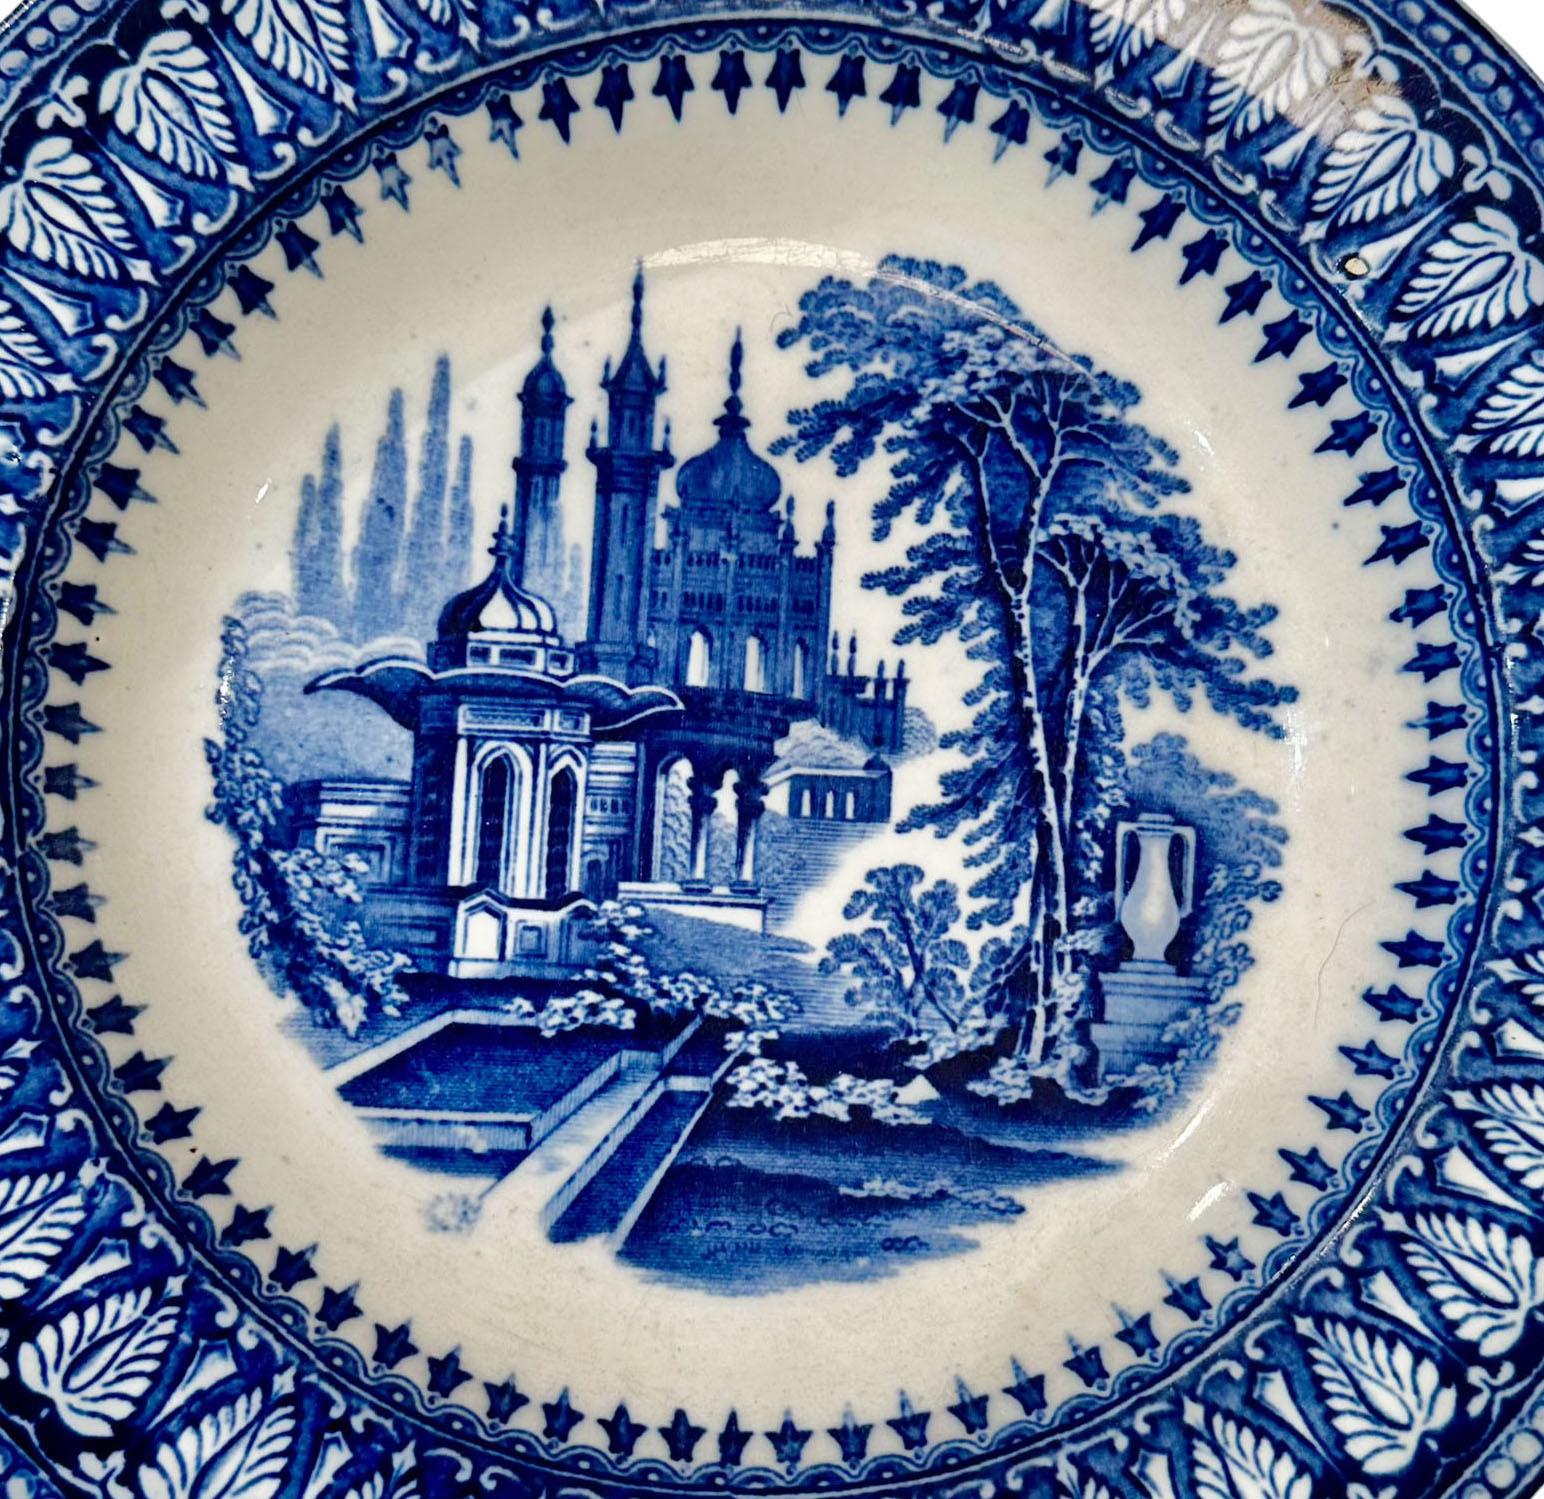 A rare Staffordshire blue and white transfer ware bowl in great condition. England, circa 1820s.
